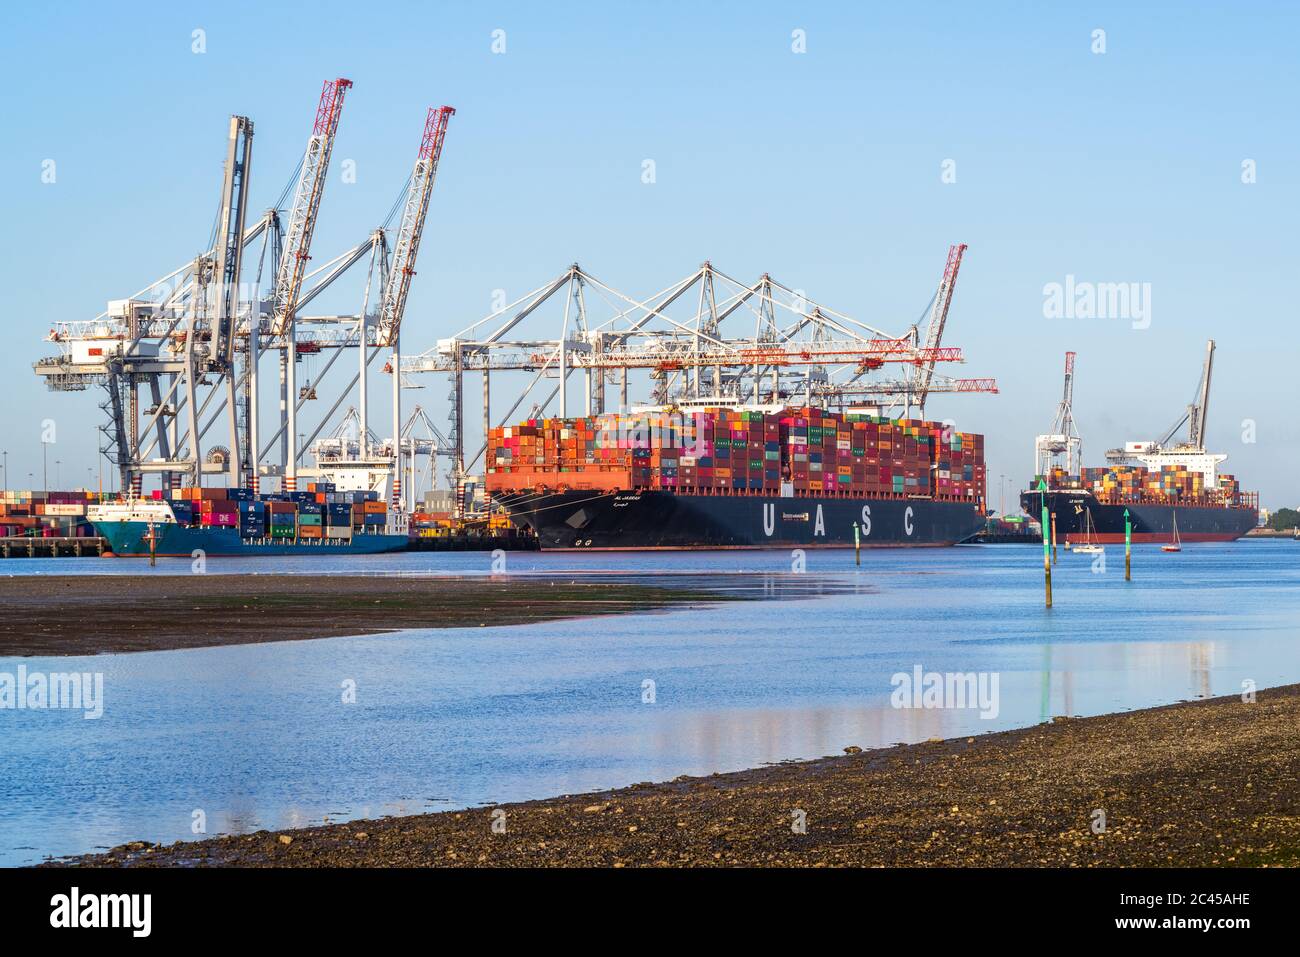 The UASC AL JASRAH Container Ship located at the Port of Southampton - as seen from Eling Waterfront, England, UK Stock Photo